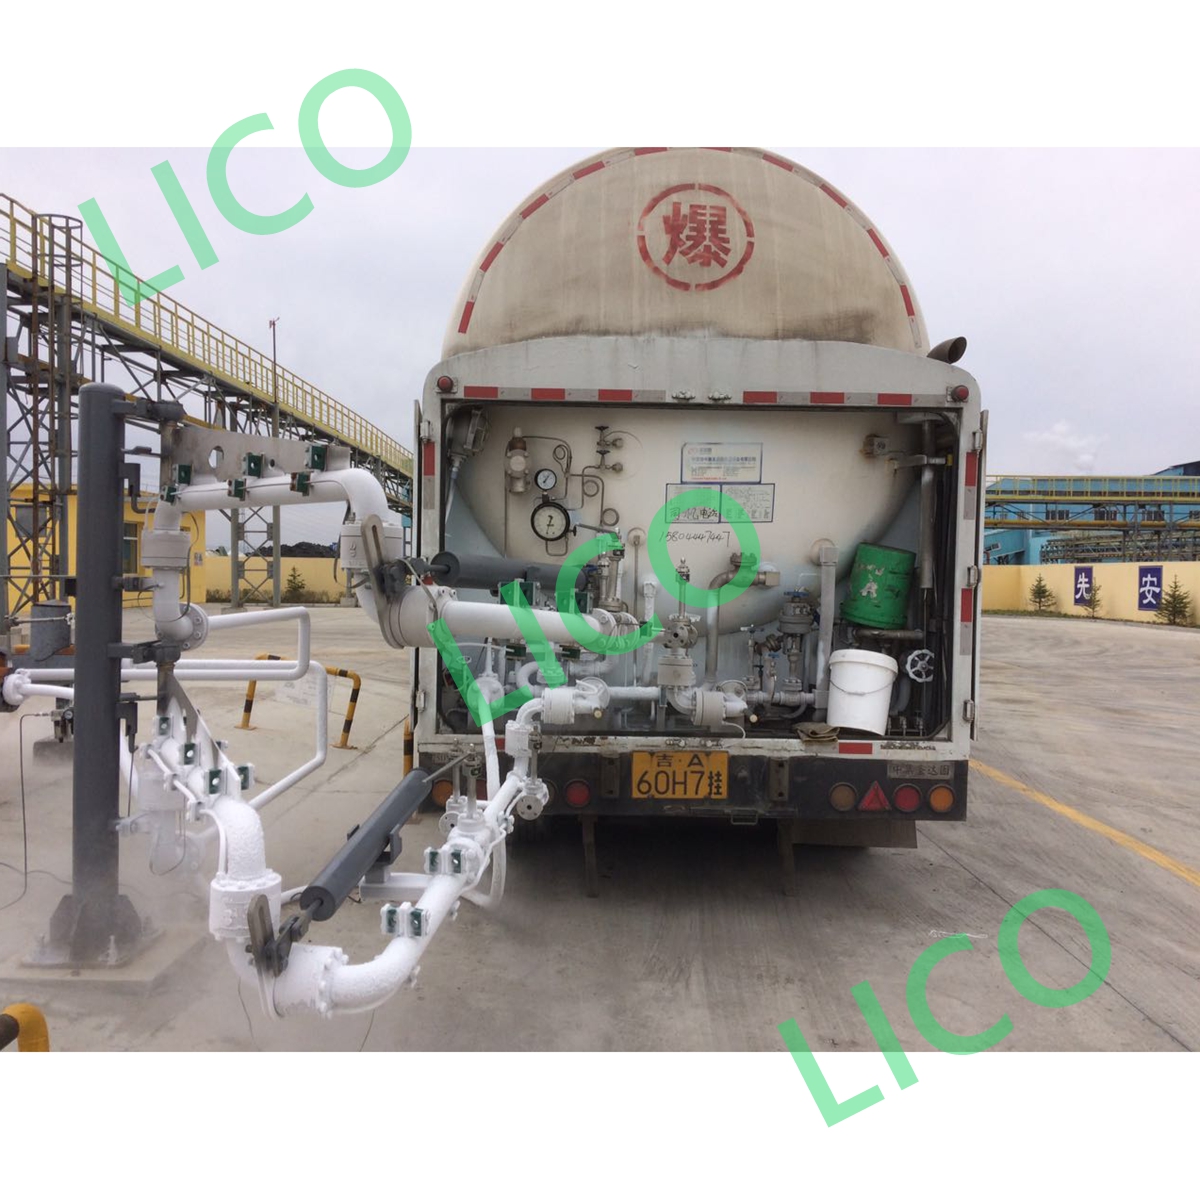 Cryogenic Loading Arm for LNG tanks